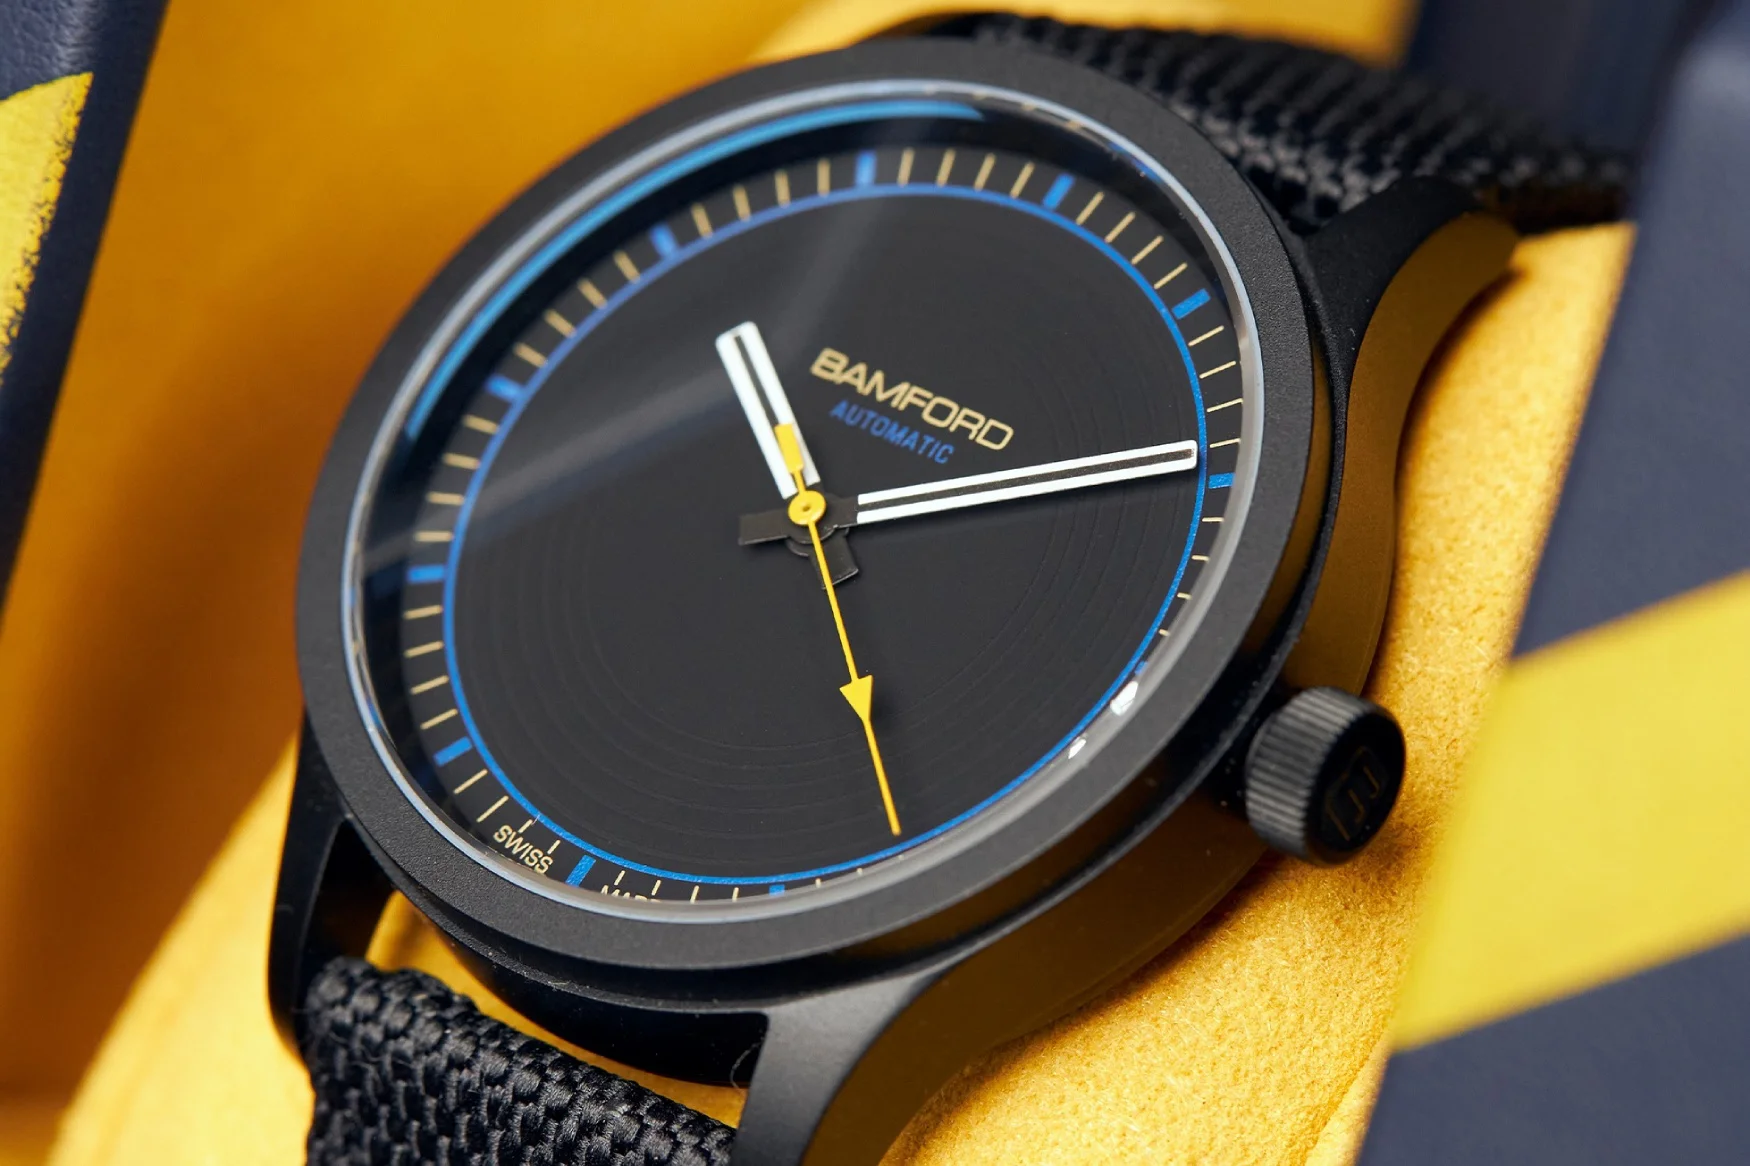 Introducing The Bamford B80 Titanium Field Watch Collection